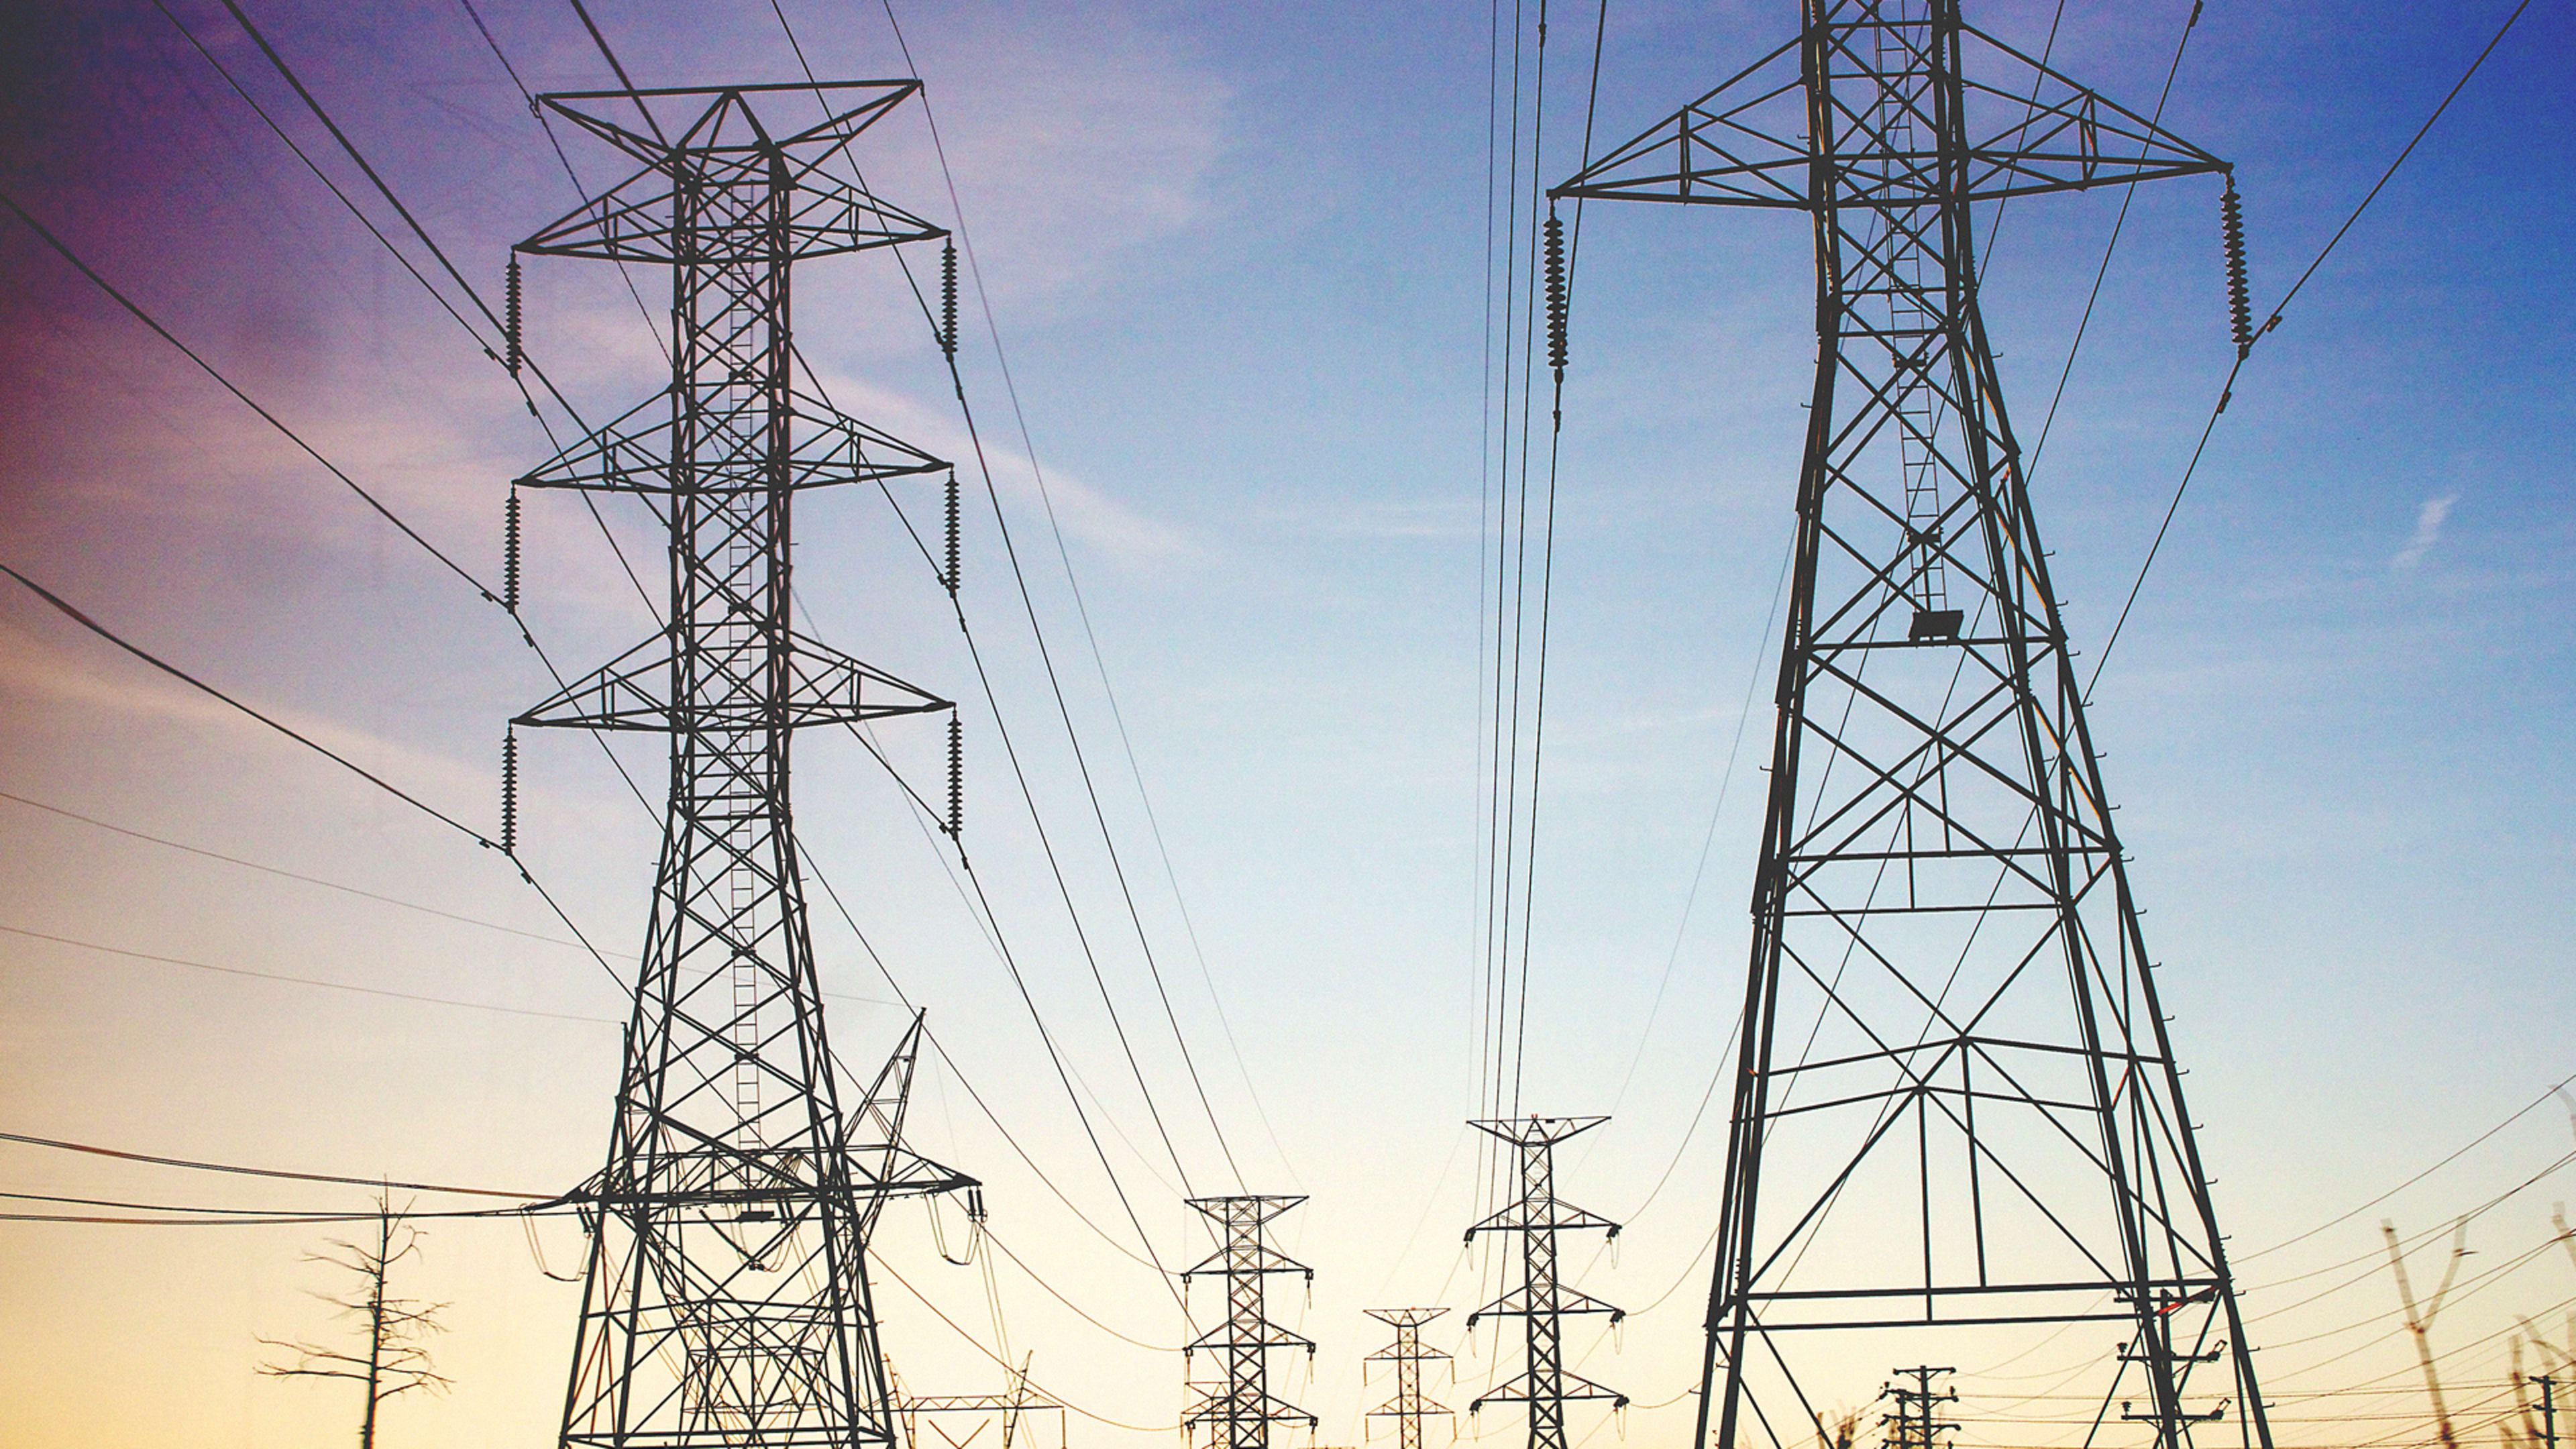 How To Prevent Attacks On The Power Grid